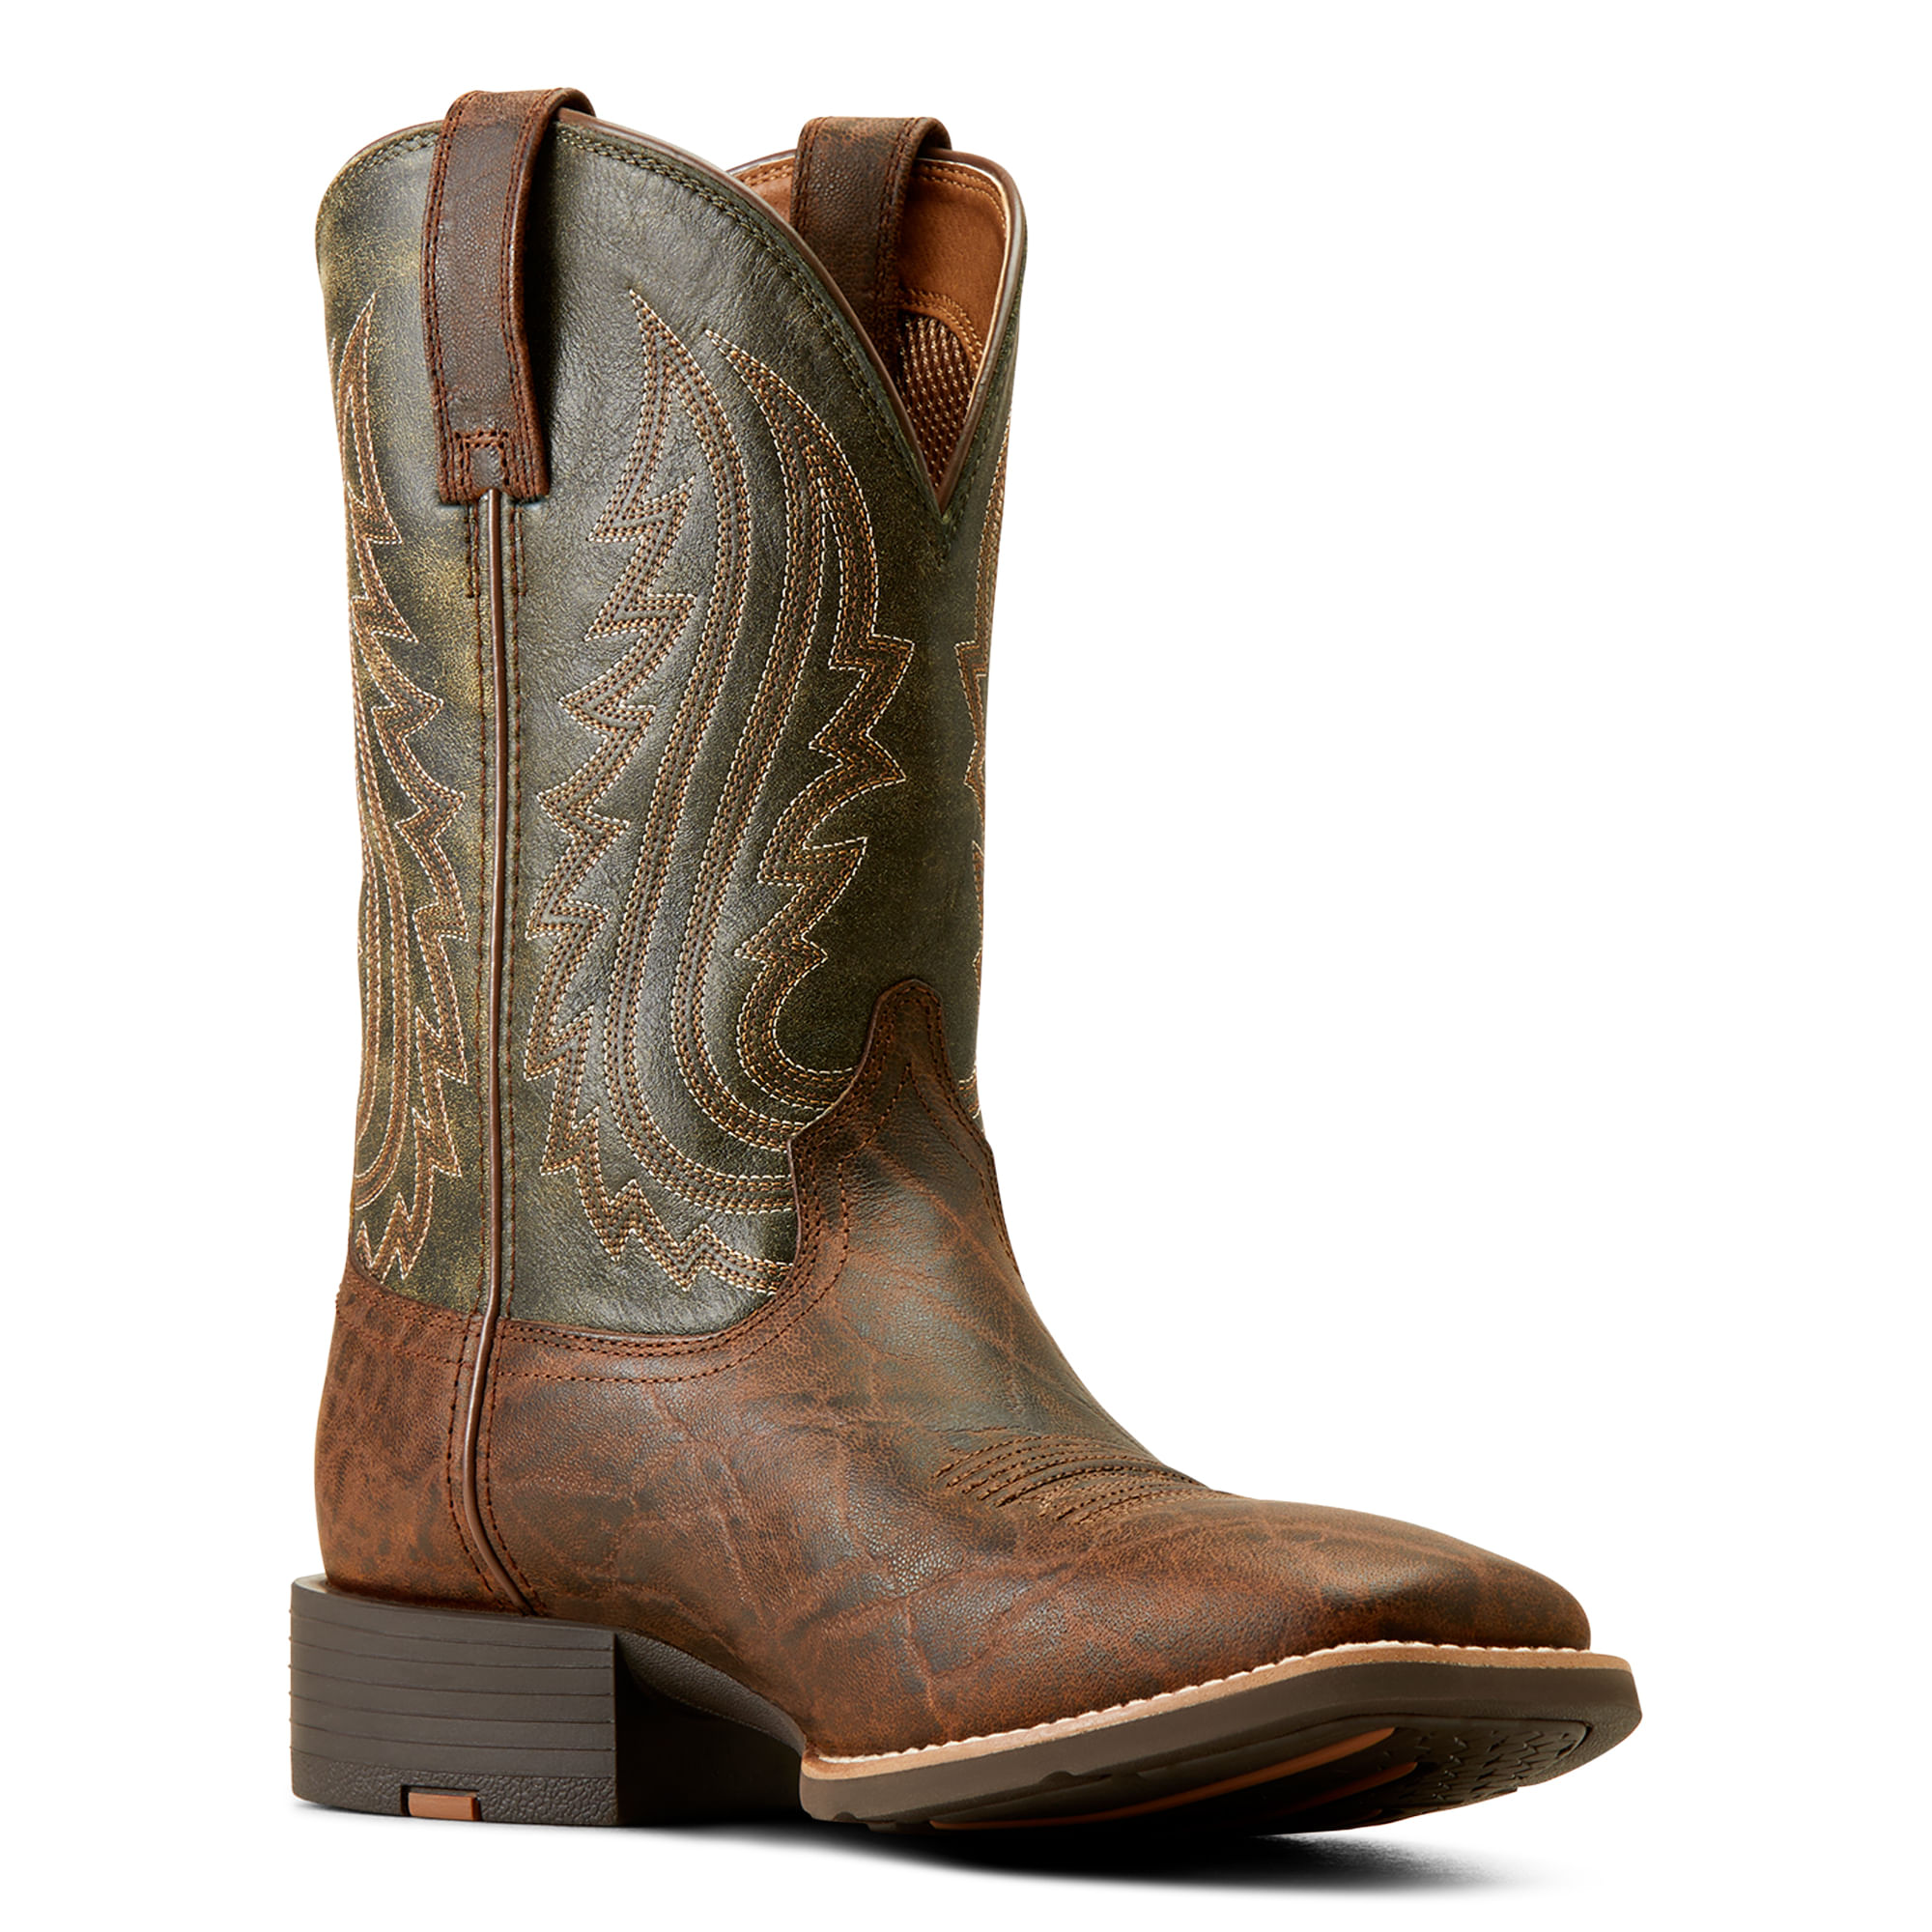 Boots or Shoes - Texas Boot Company